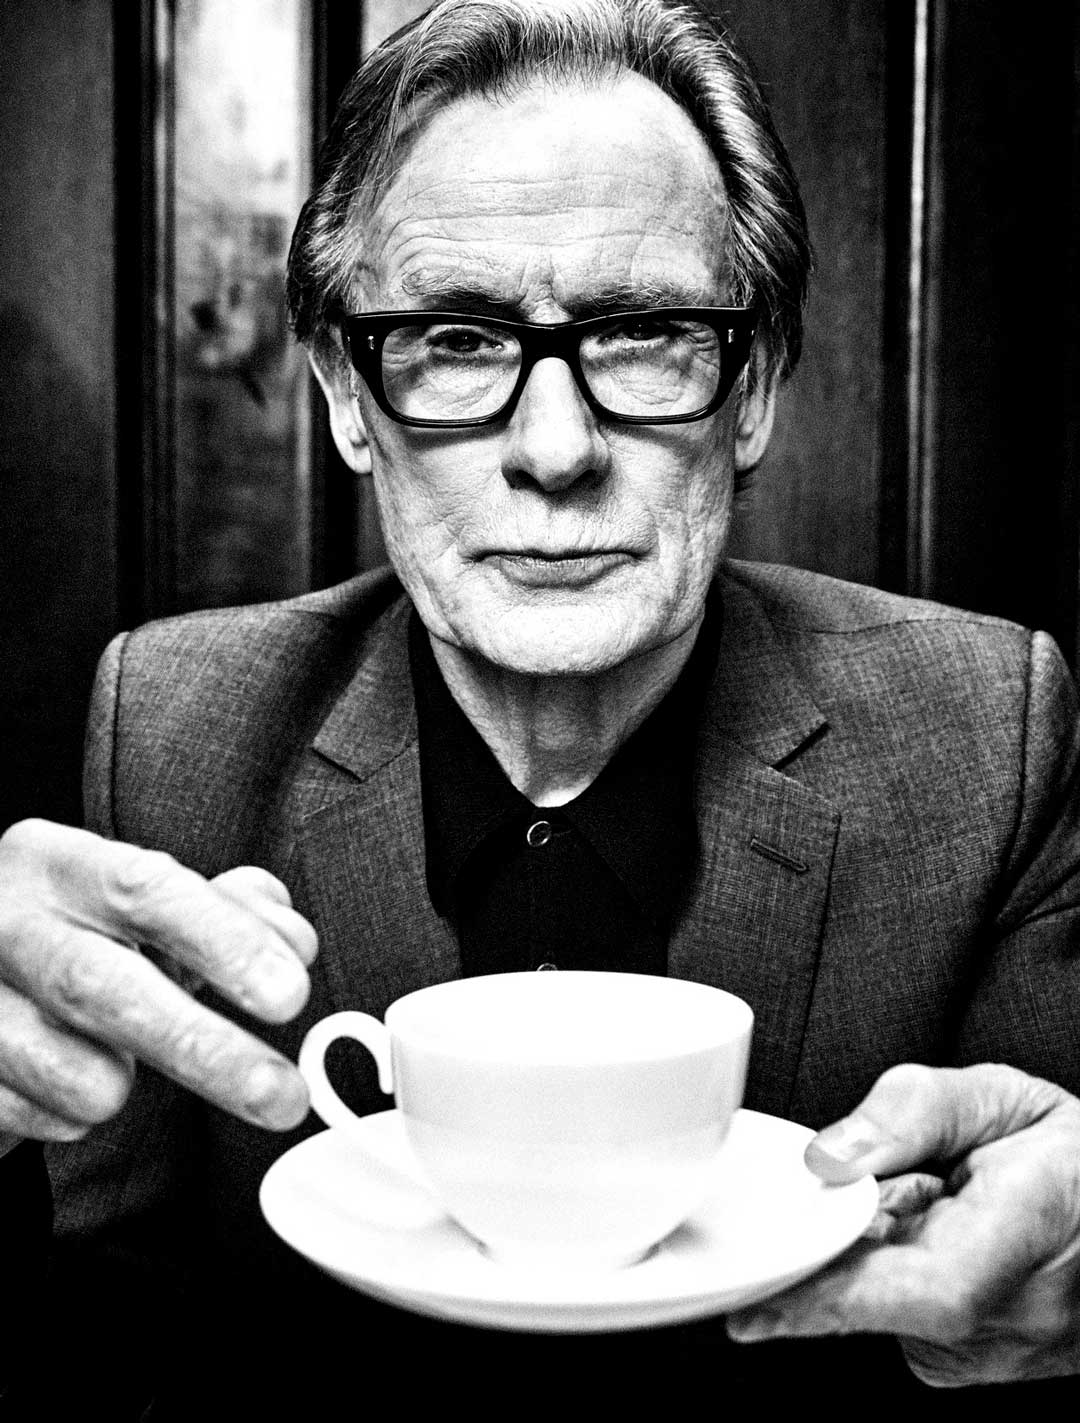 Greyscale portrait of mature gentleman holding tea cup wearing thick black spectacles